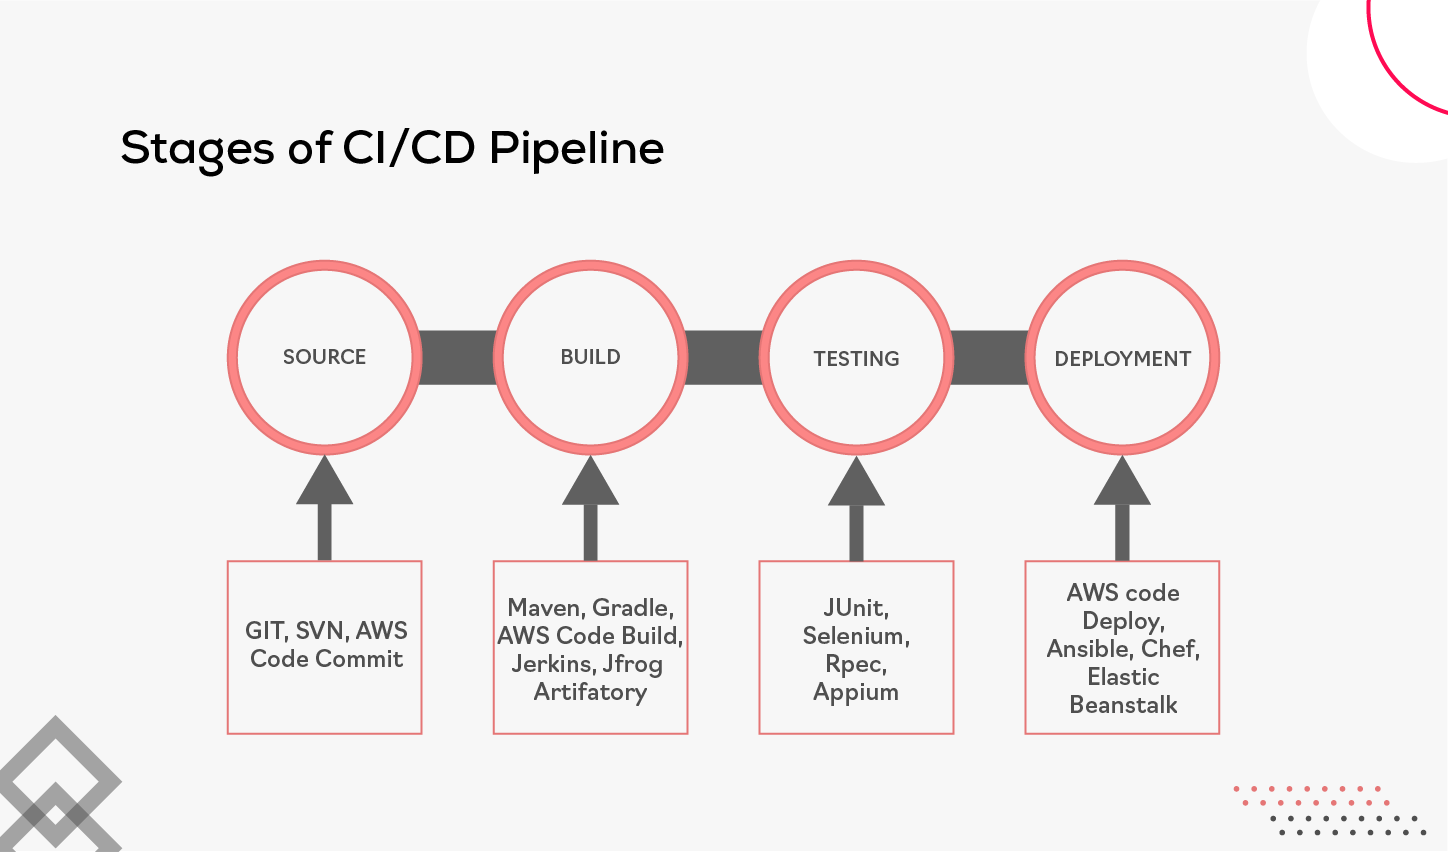 Stages of CI/CD Pipeline